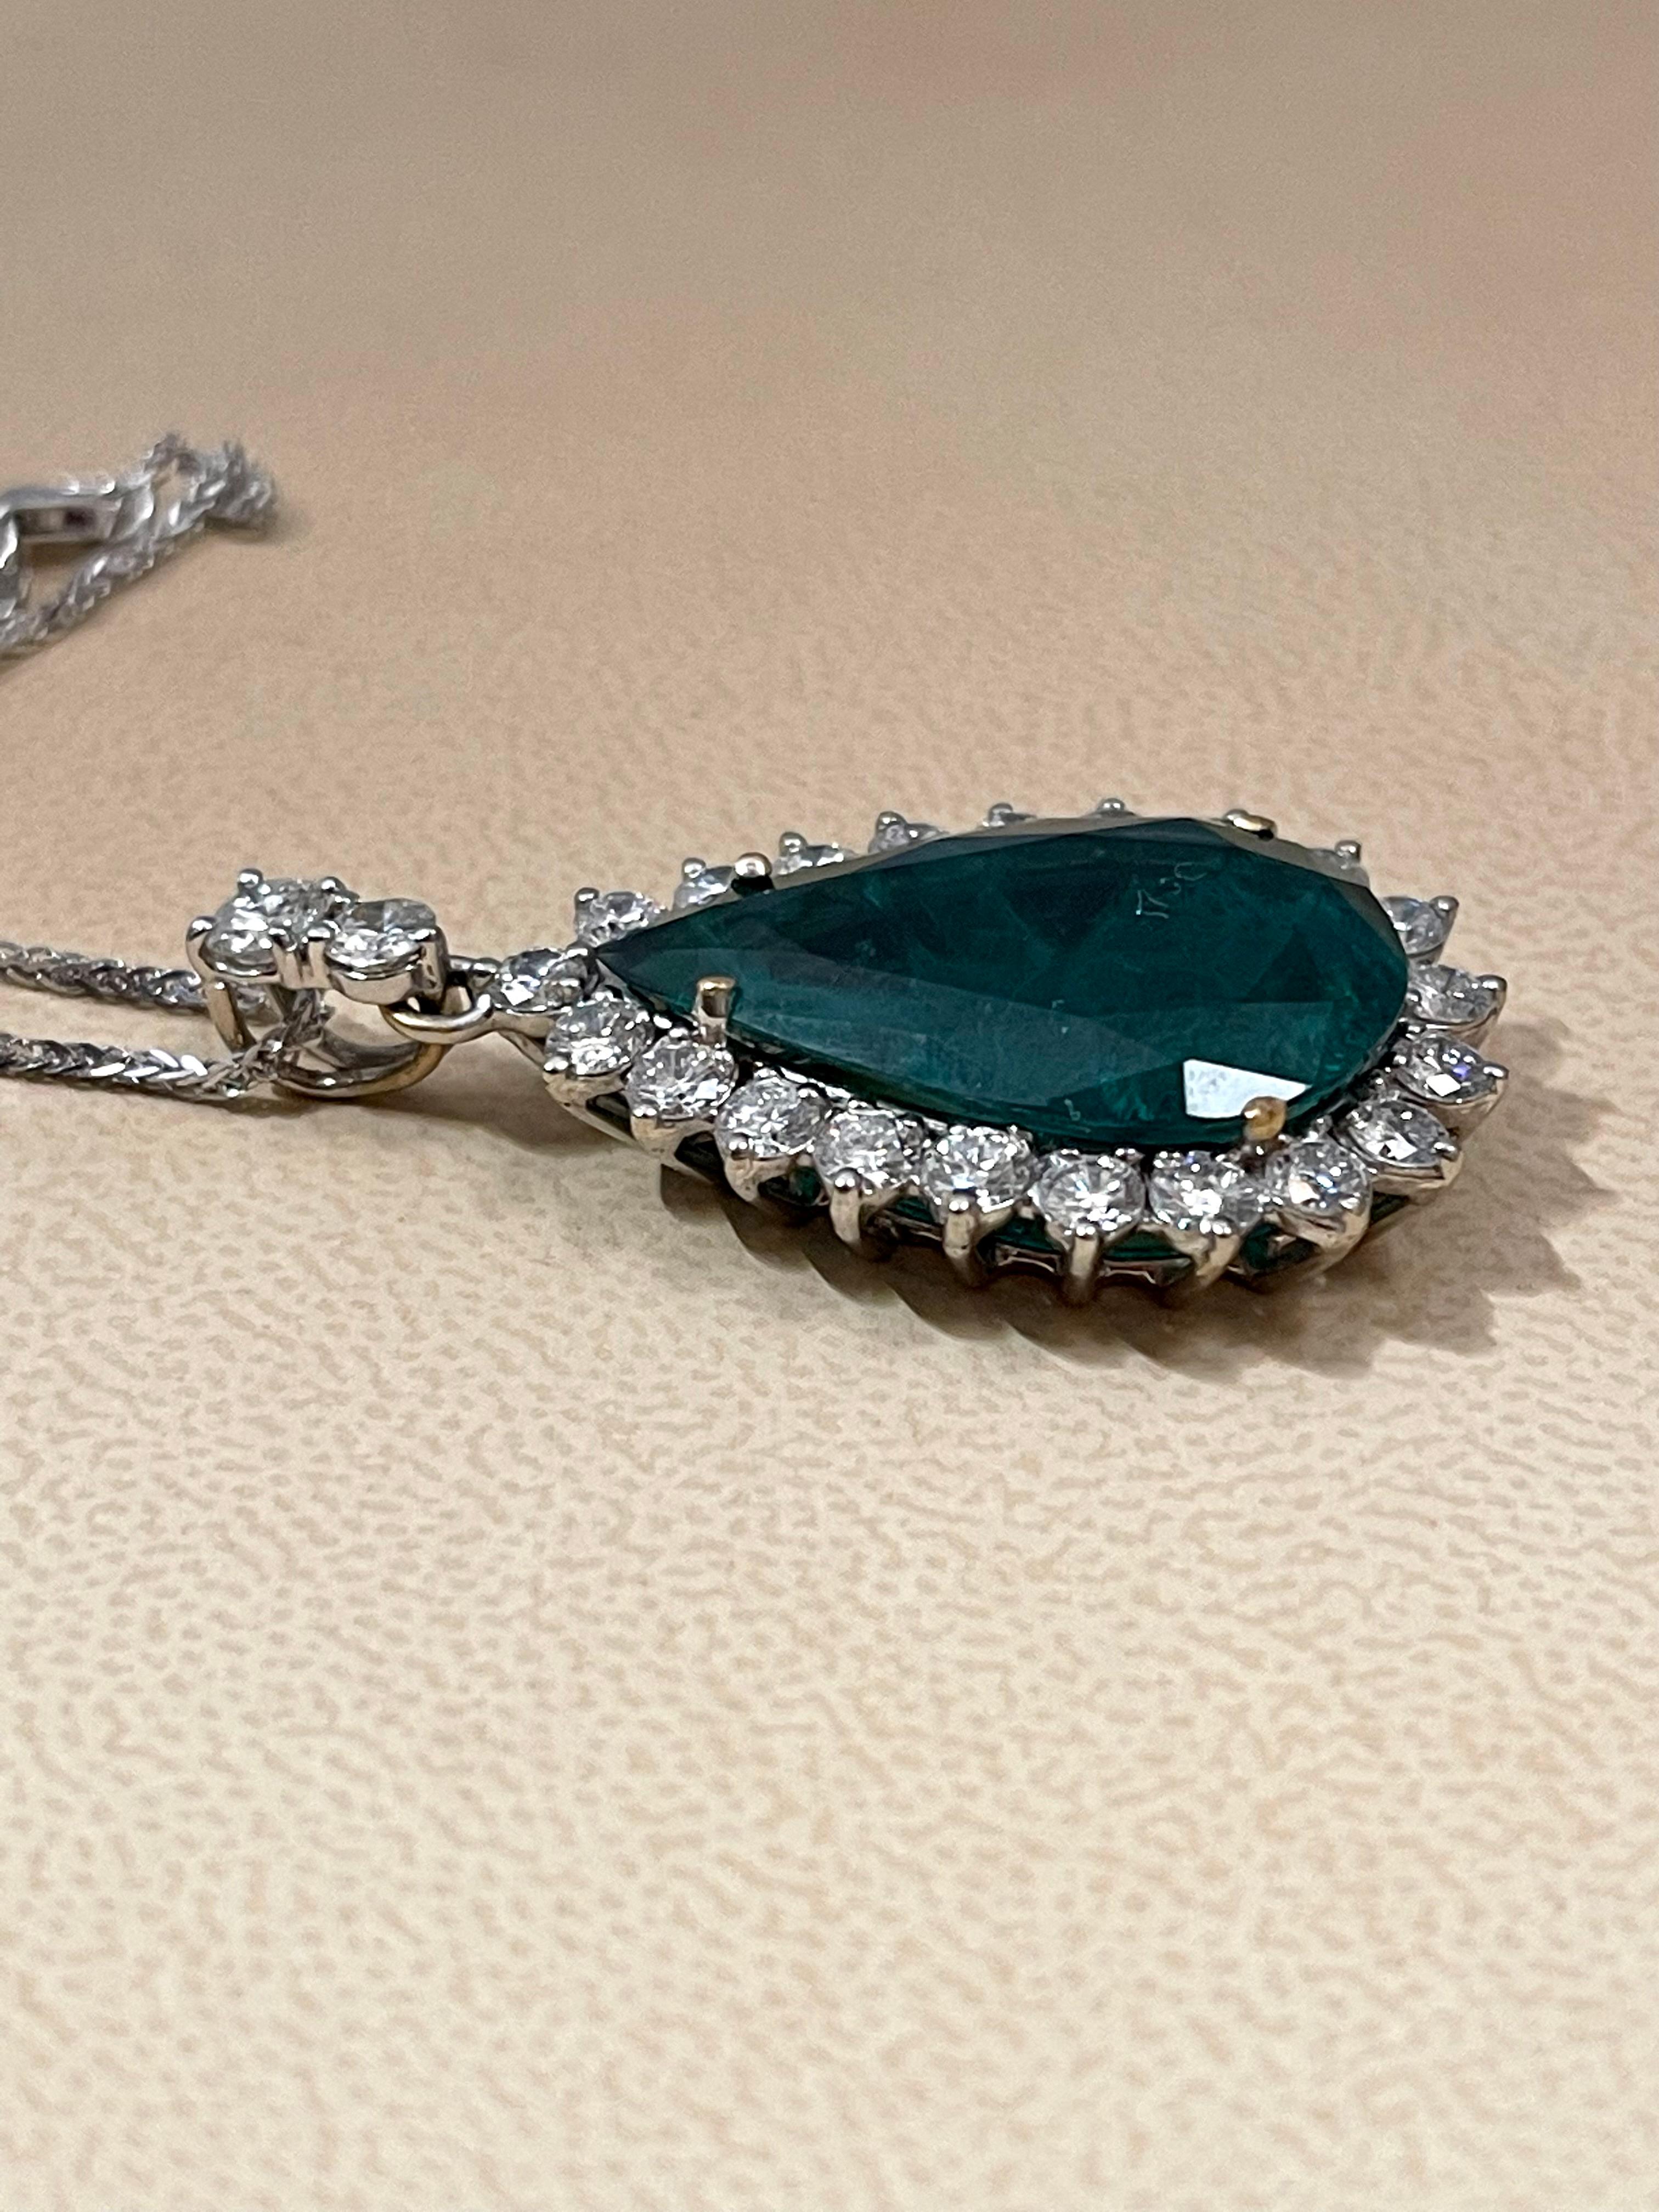 15 Ct Pear Hydro Emerald & 4 Ct Diamond Pendent/Necklace 18 Kt White Gold In Excellent Condition For Sale In New York, NY